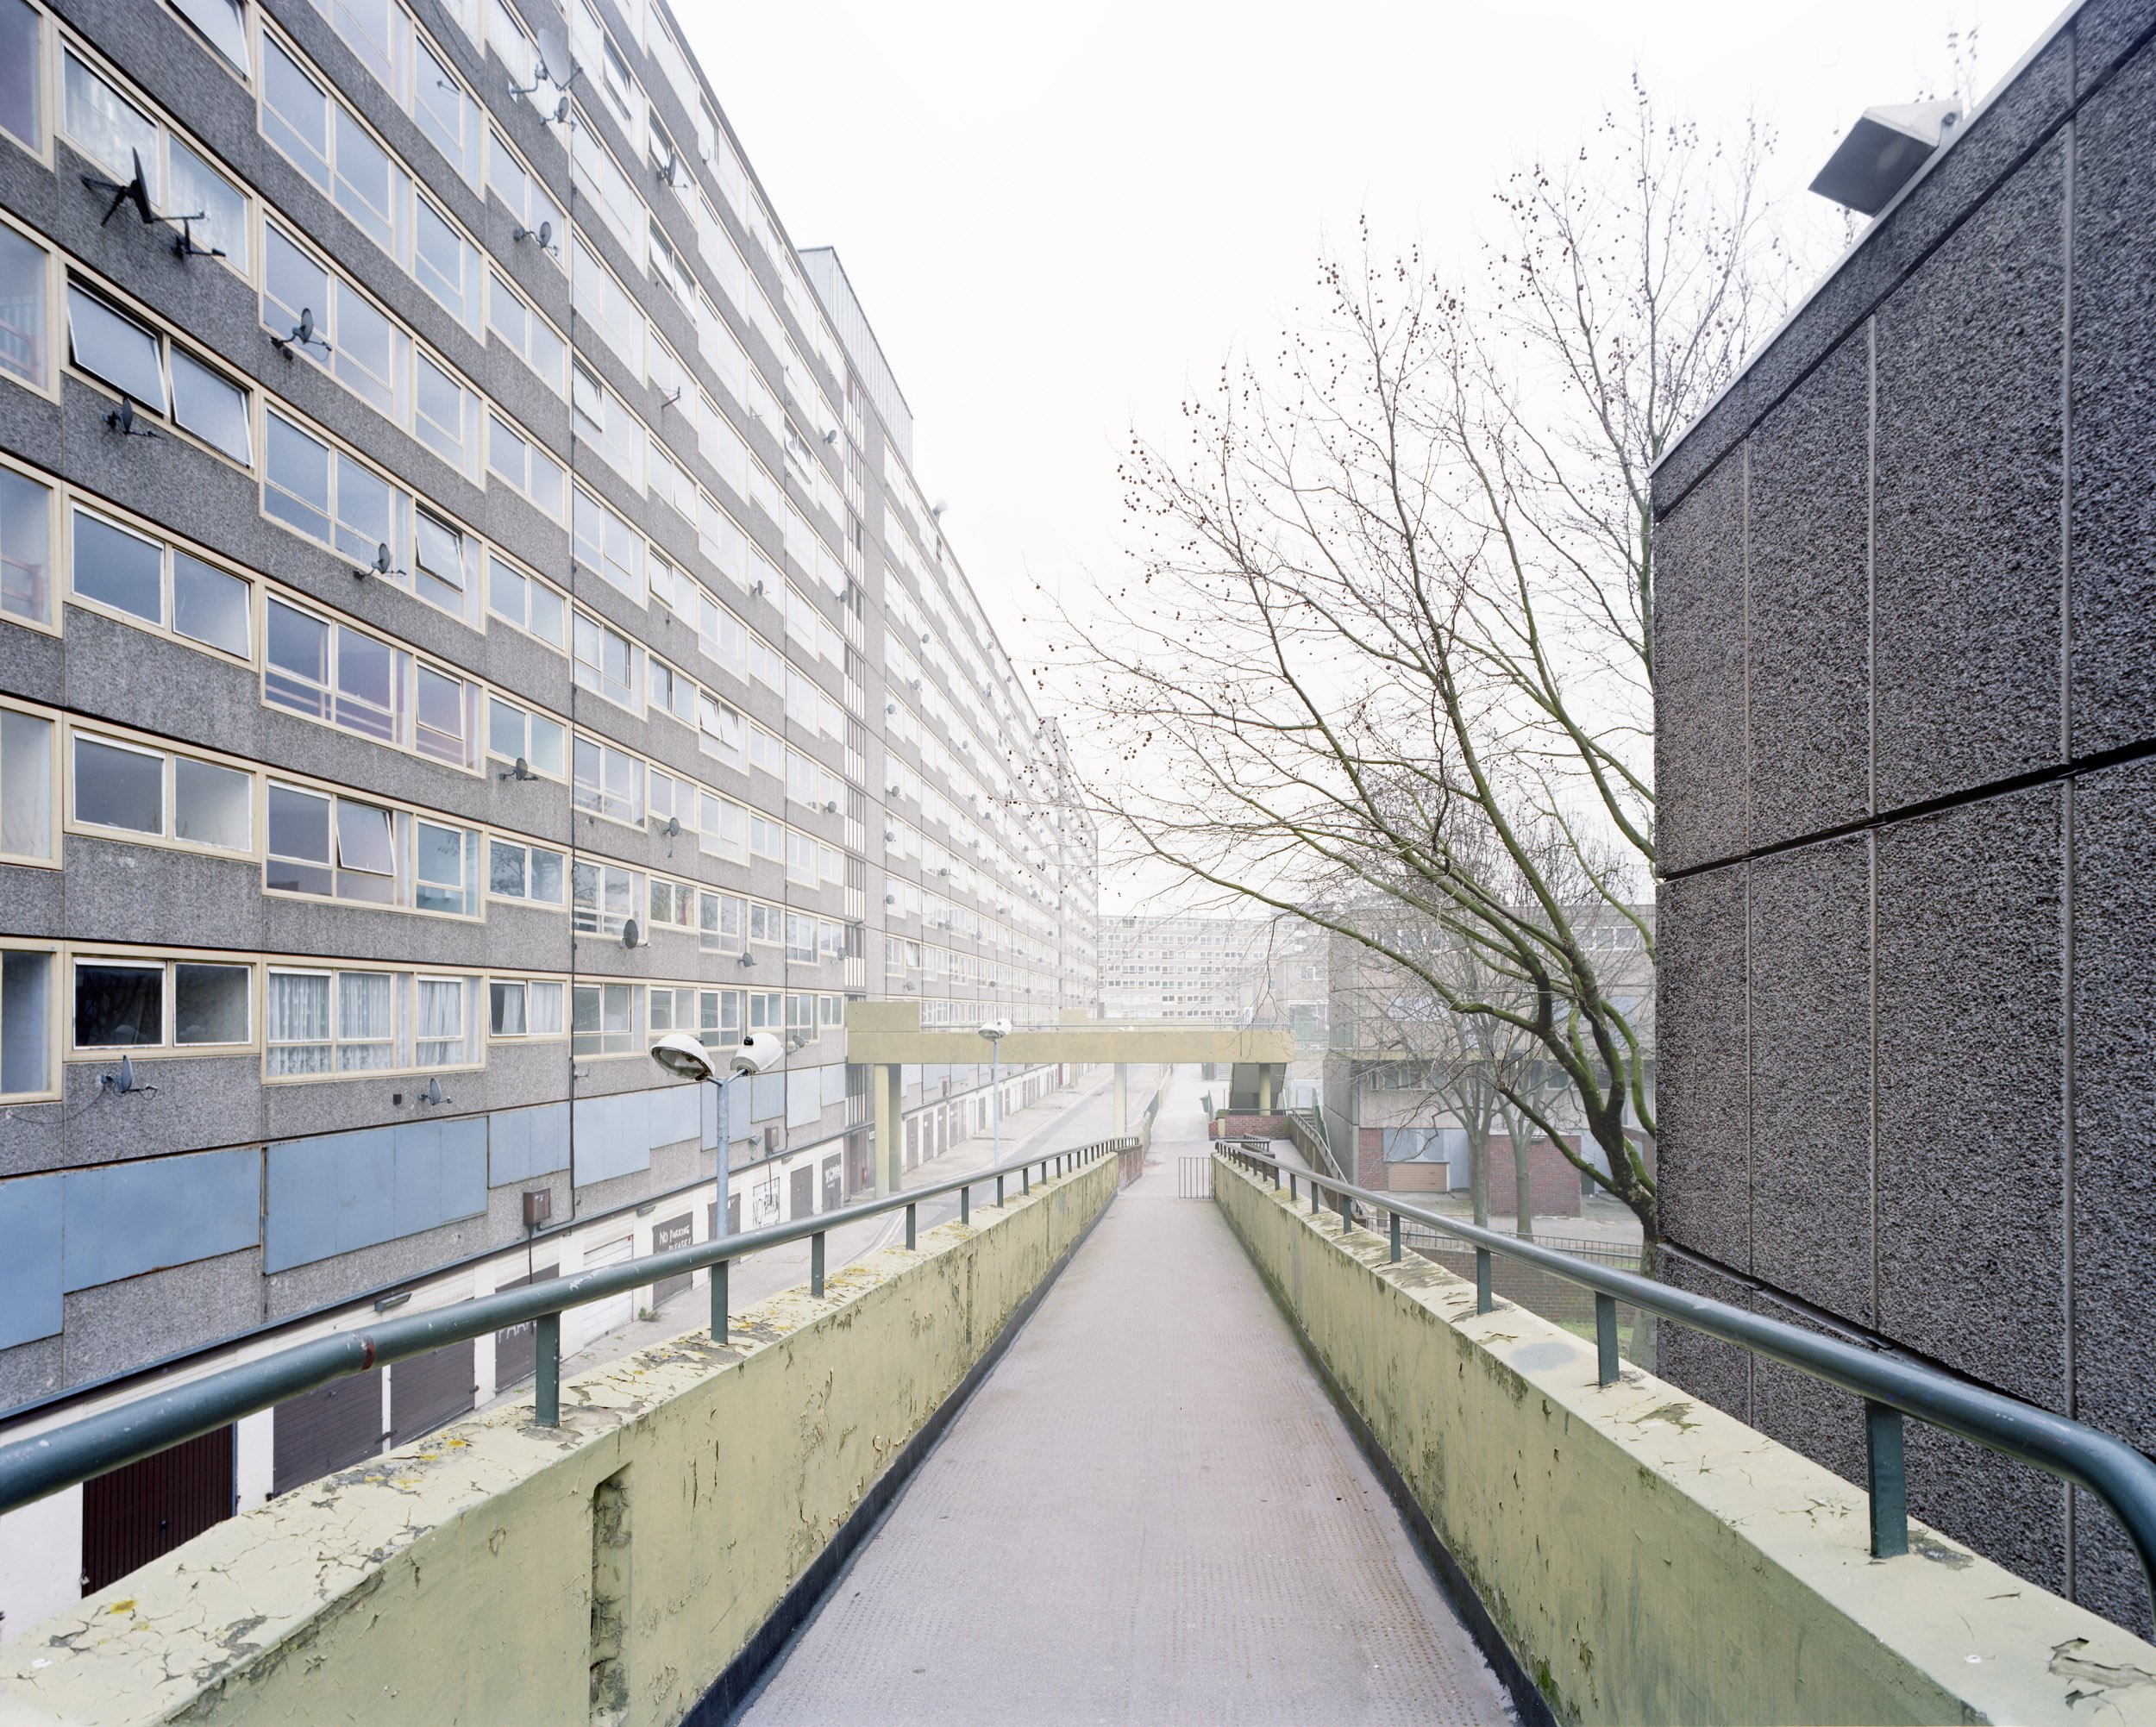 heygate-abstracted-simon-kennedy-mass-collective-photography-architecture-00004.jpg